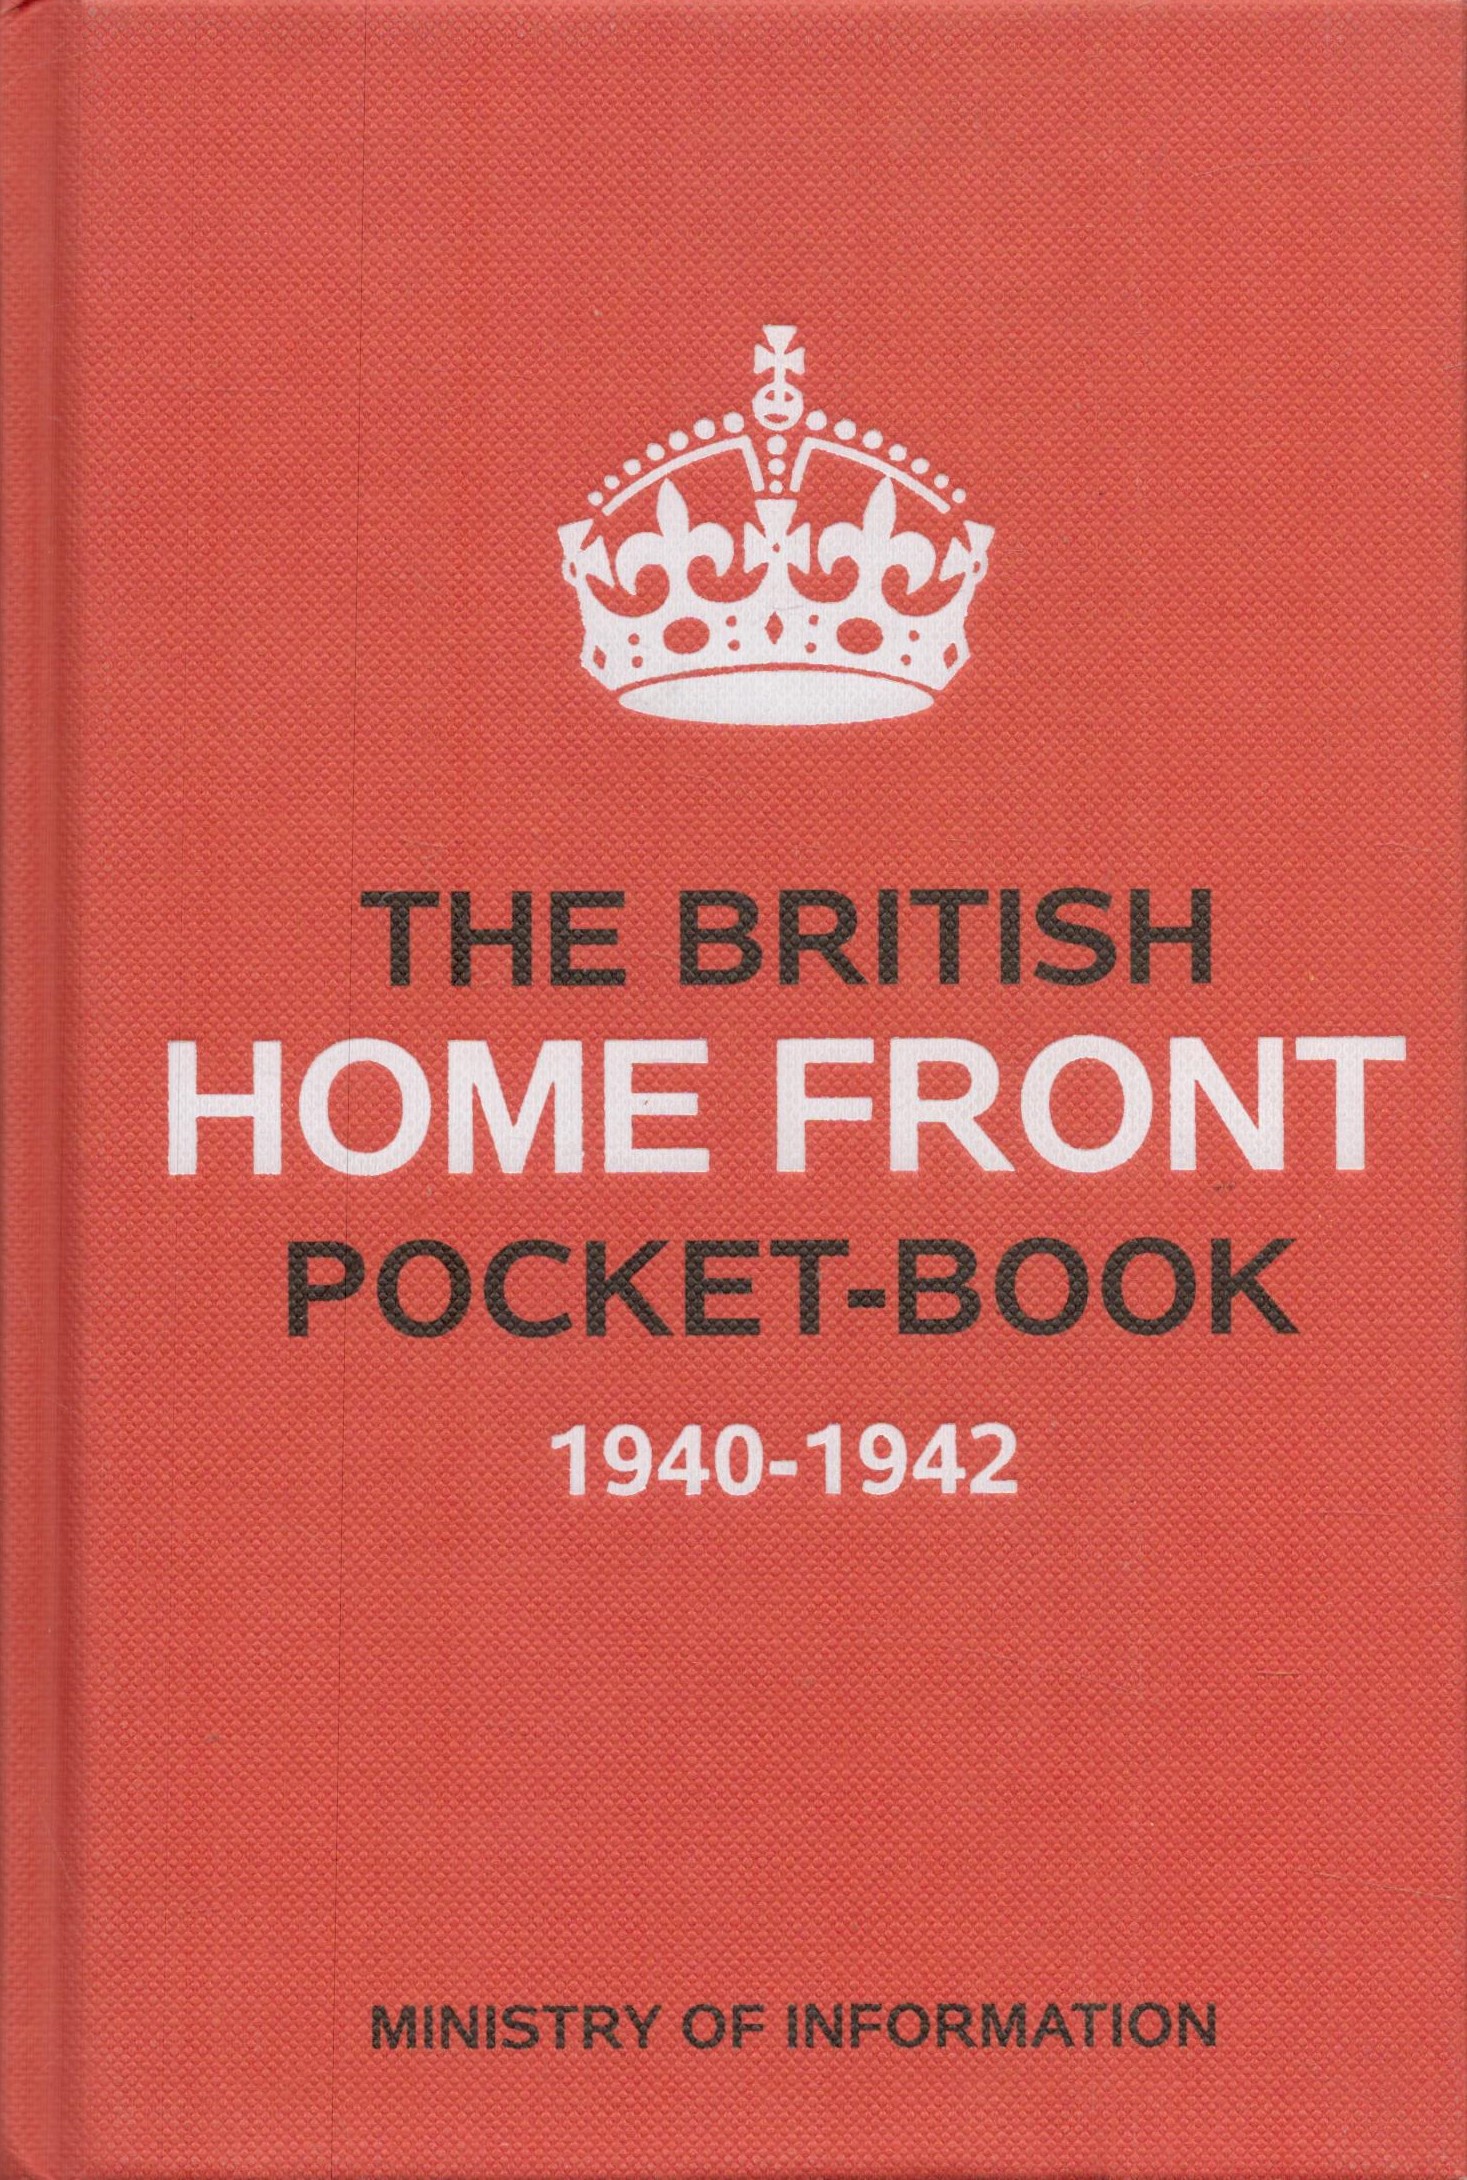 Brian Lavery Hardback Book titled The British Home Front Pocketbook 1940-1942. First Edition,